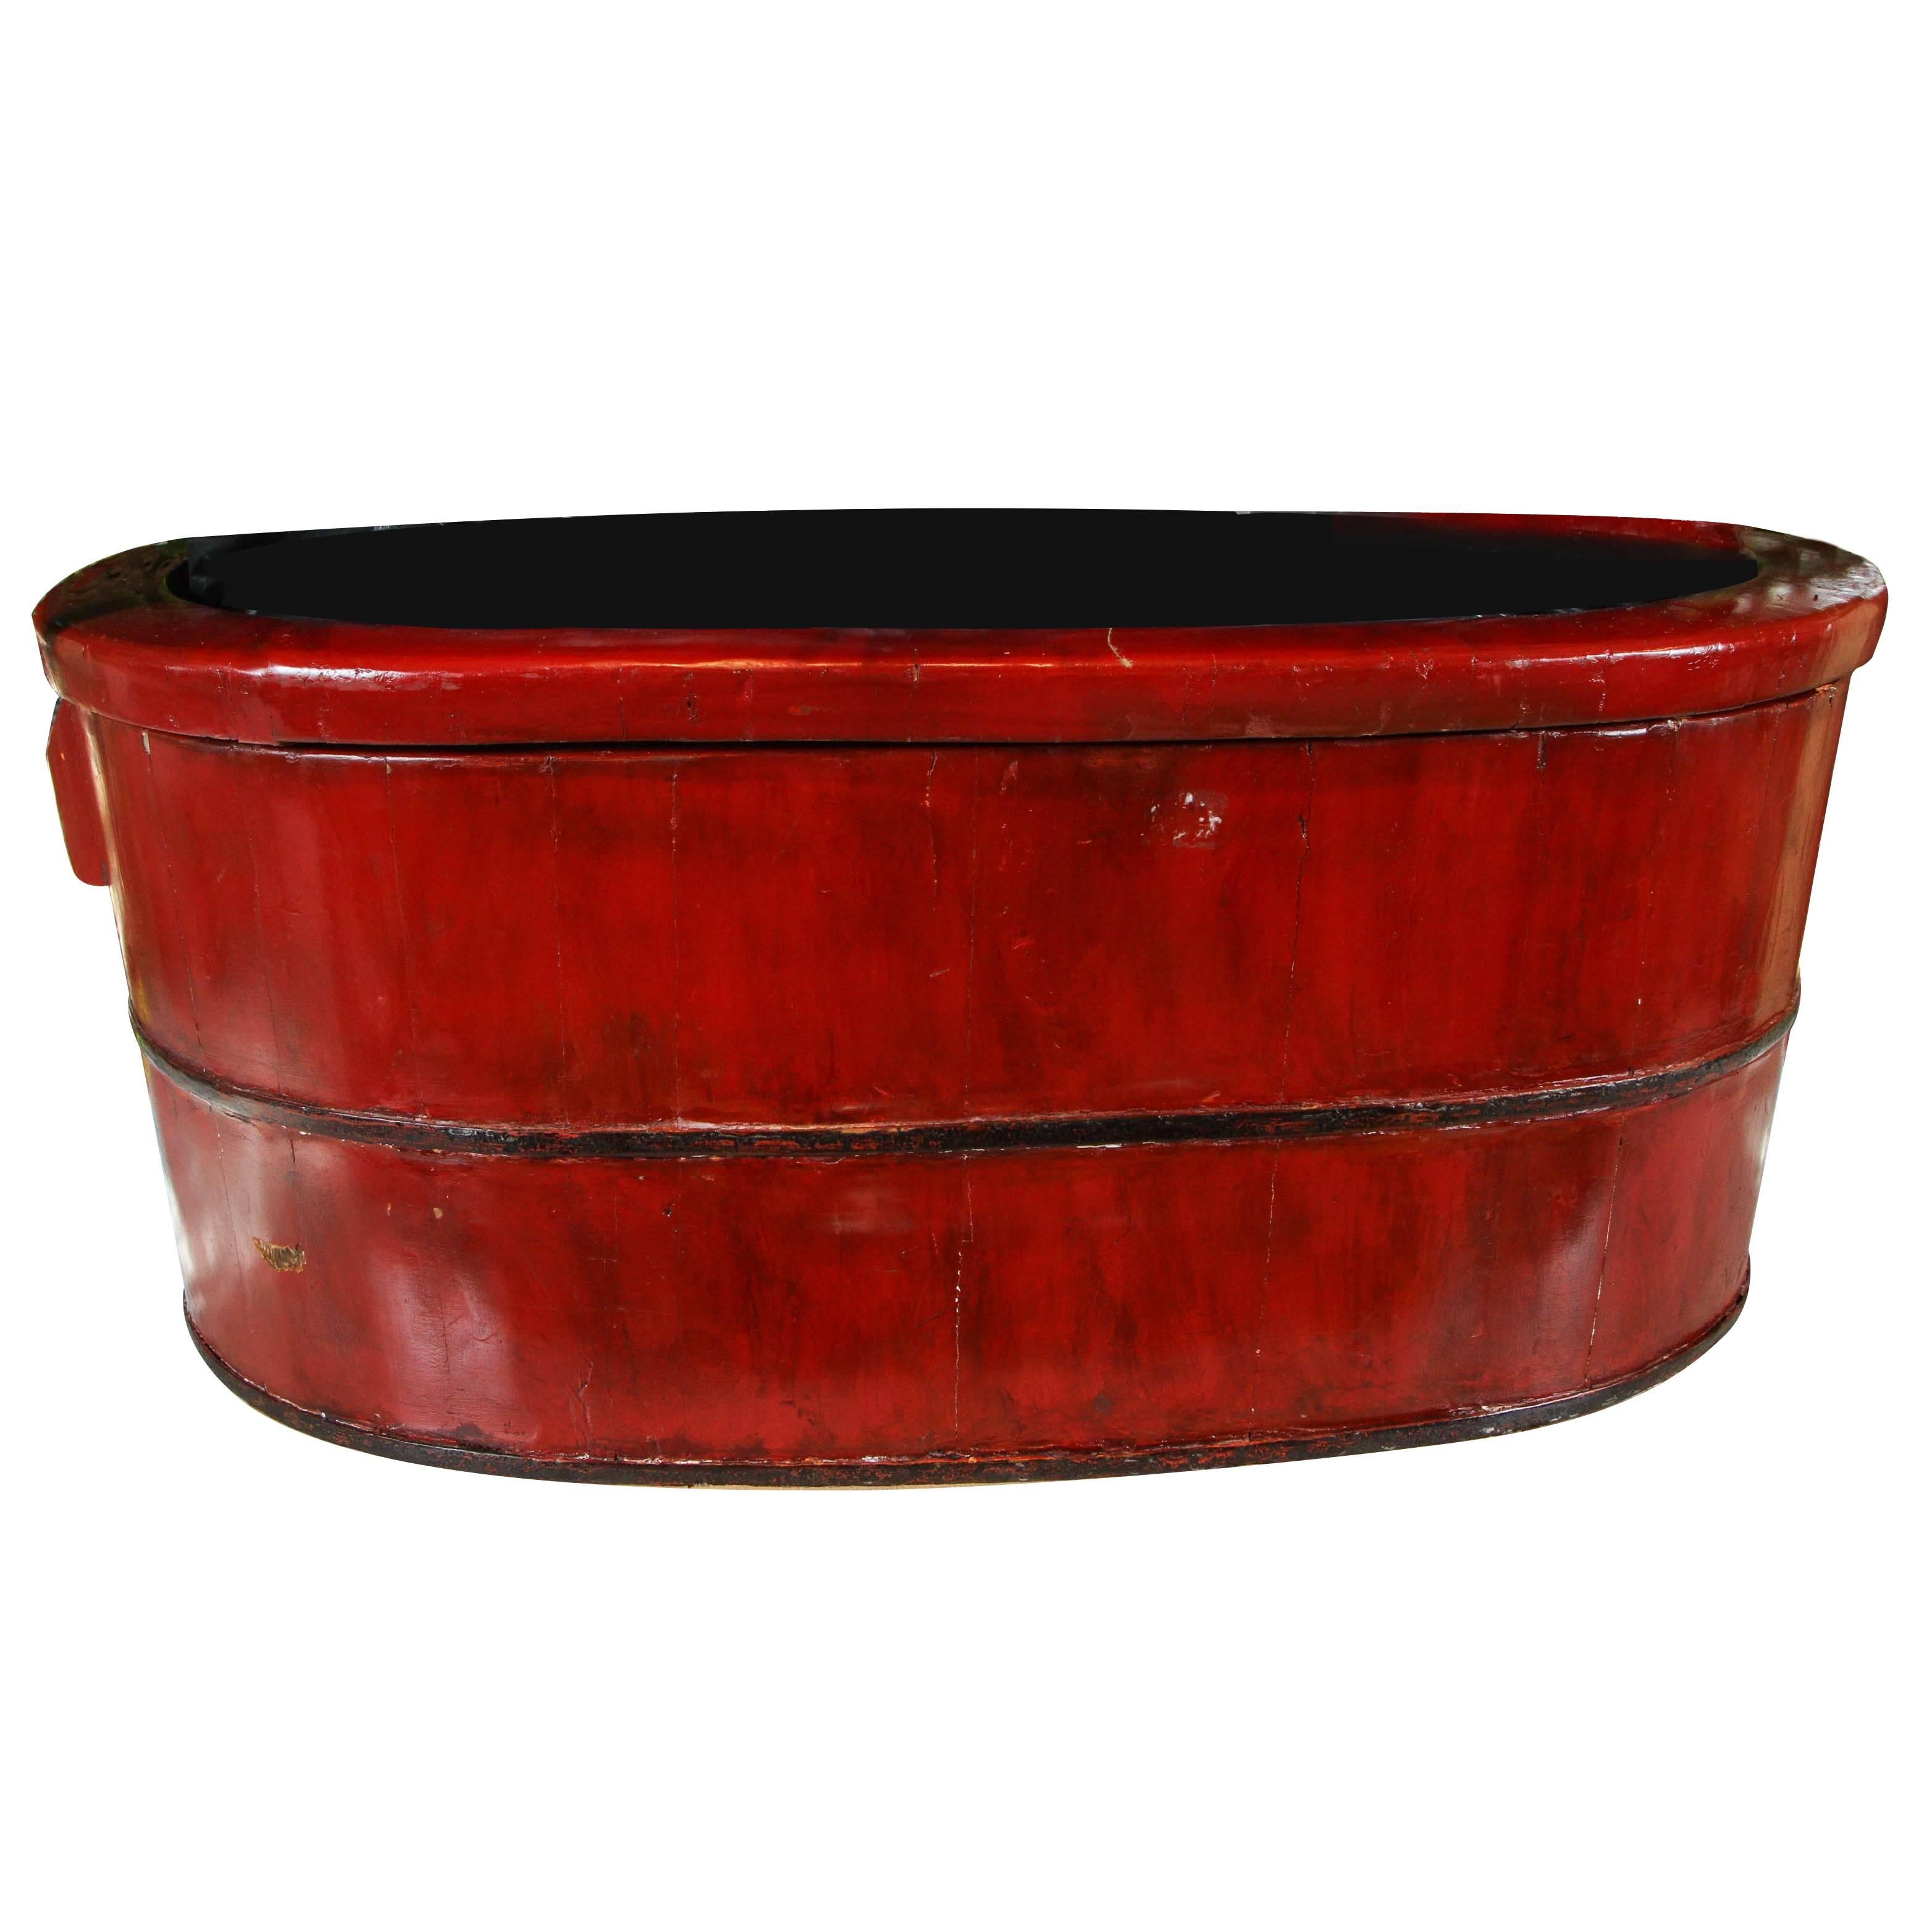 Asian, Iron-Banded, Red Lacquered Sectioned Wood Tub, Early 20th Century